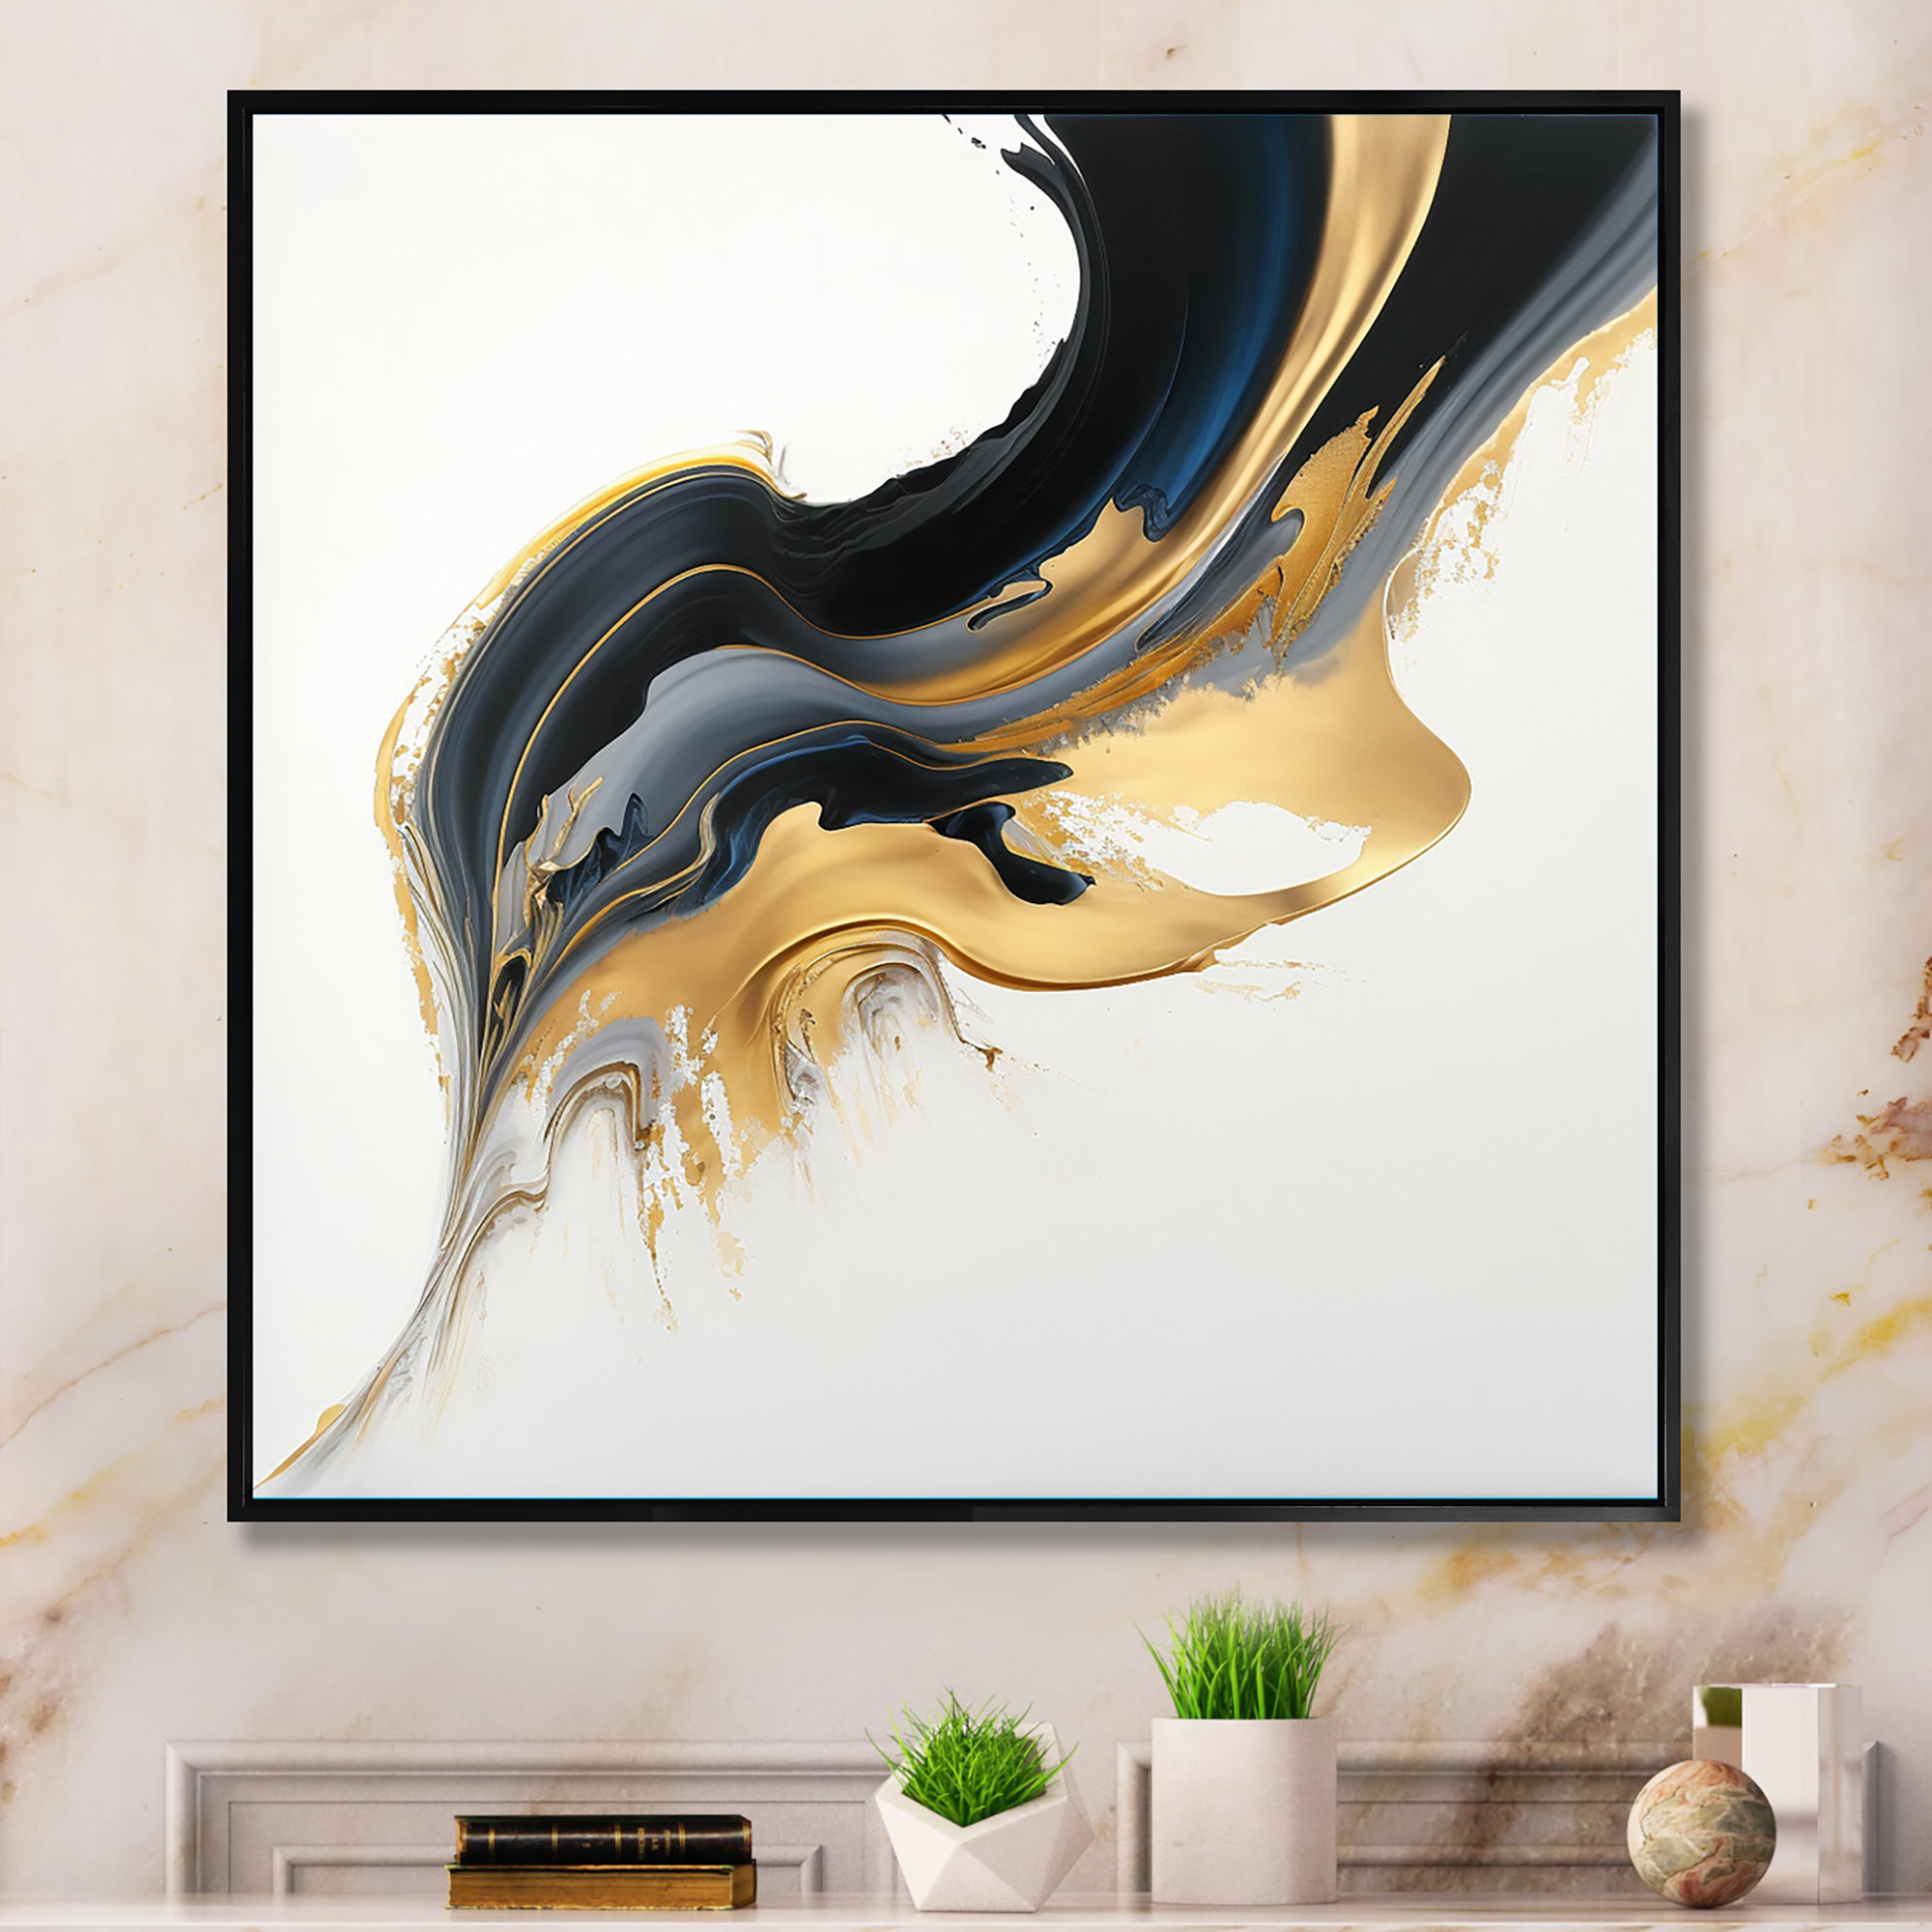 Black and Yellow Circle Abstract 1 - Wrapped Canvas Graphic Art Willa Arlo Interiors Size: 30 H x 30 W x 1.25 D